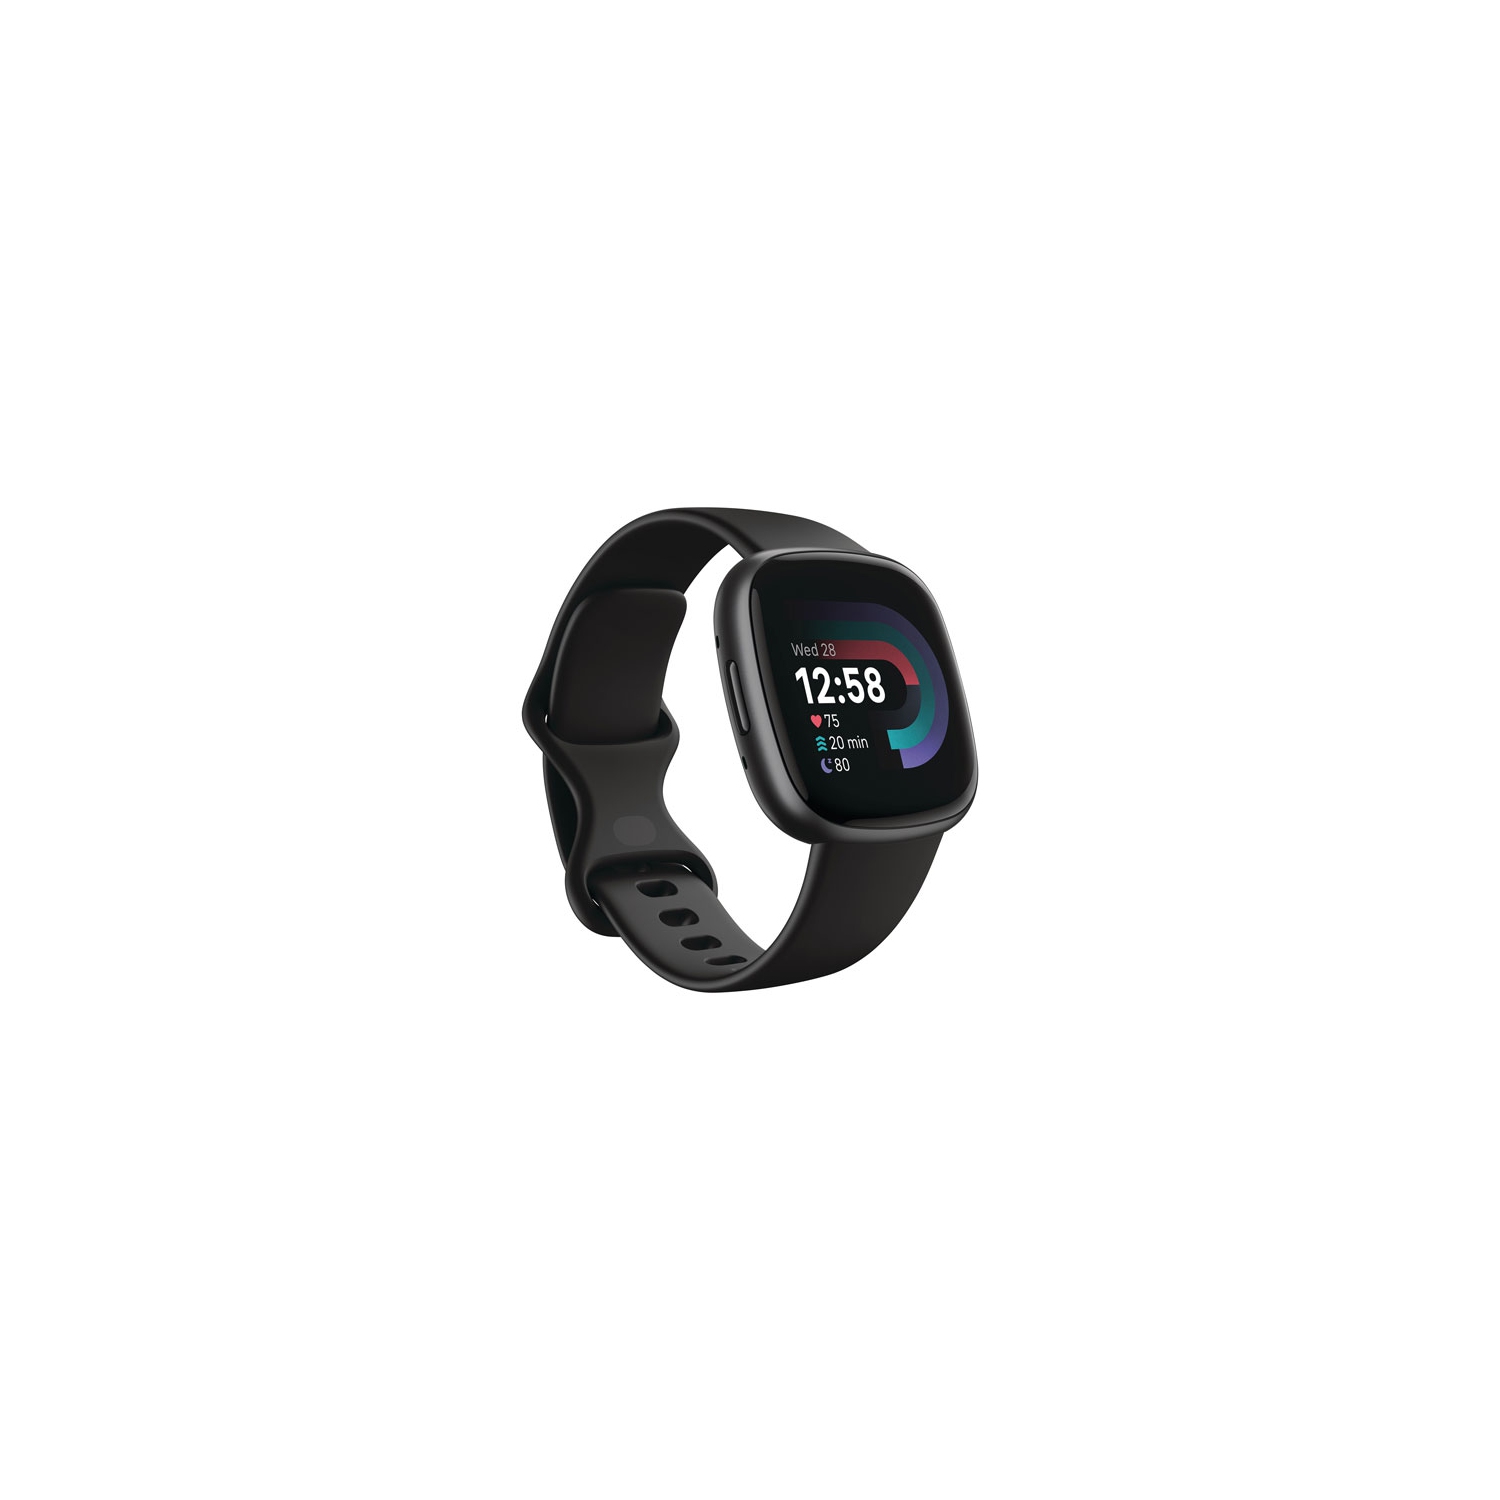 Fitbit Versa 4 + Premium Smartwatch with Heart Rate Monitor - Black - Open Box